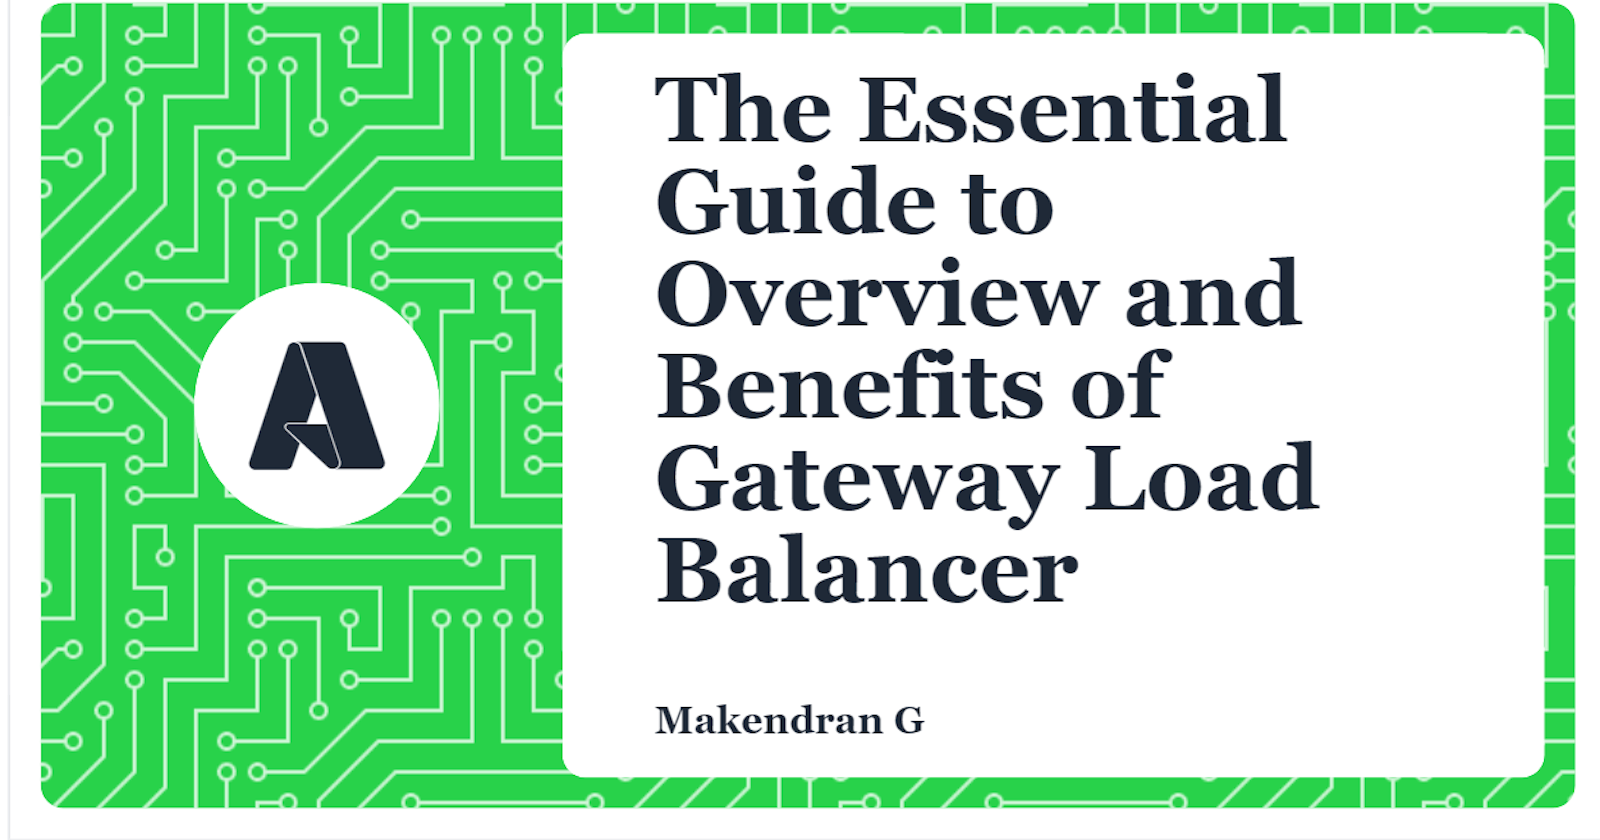 The Essential Guide to Overview and Benefits of Gateway Load Balancer